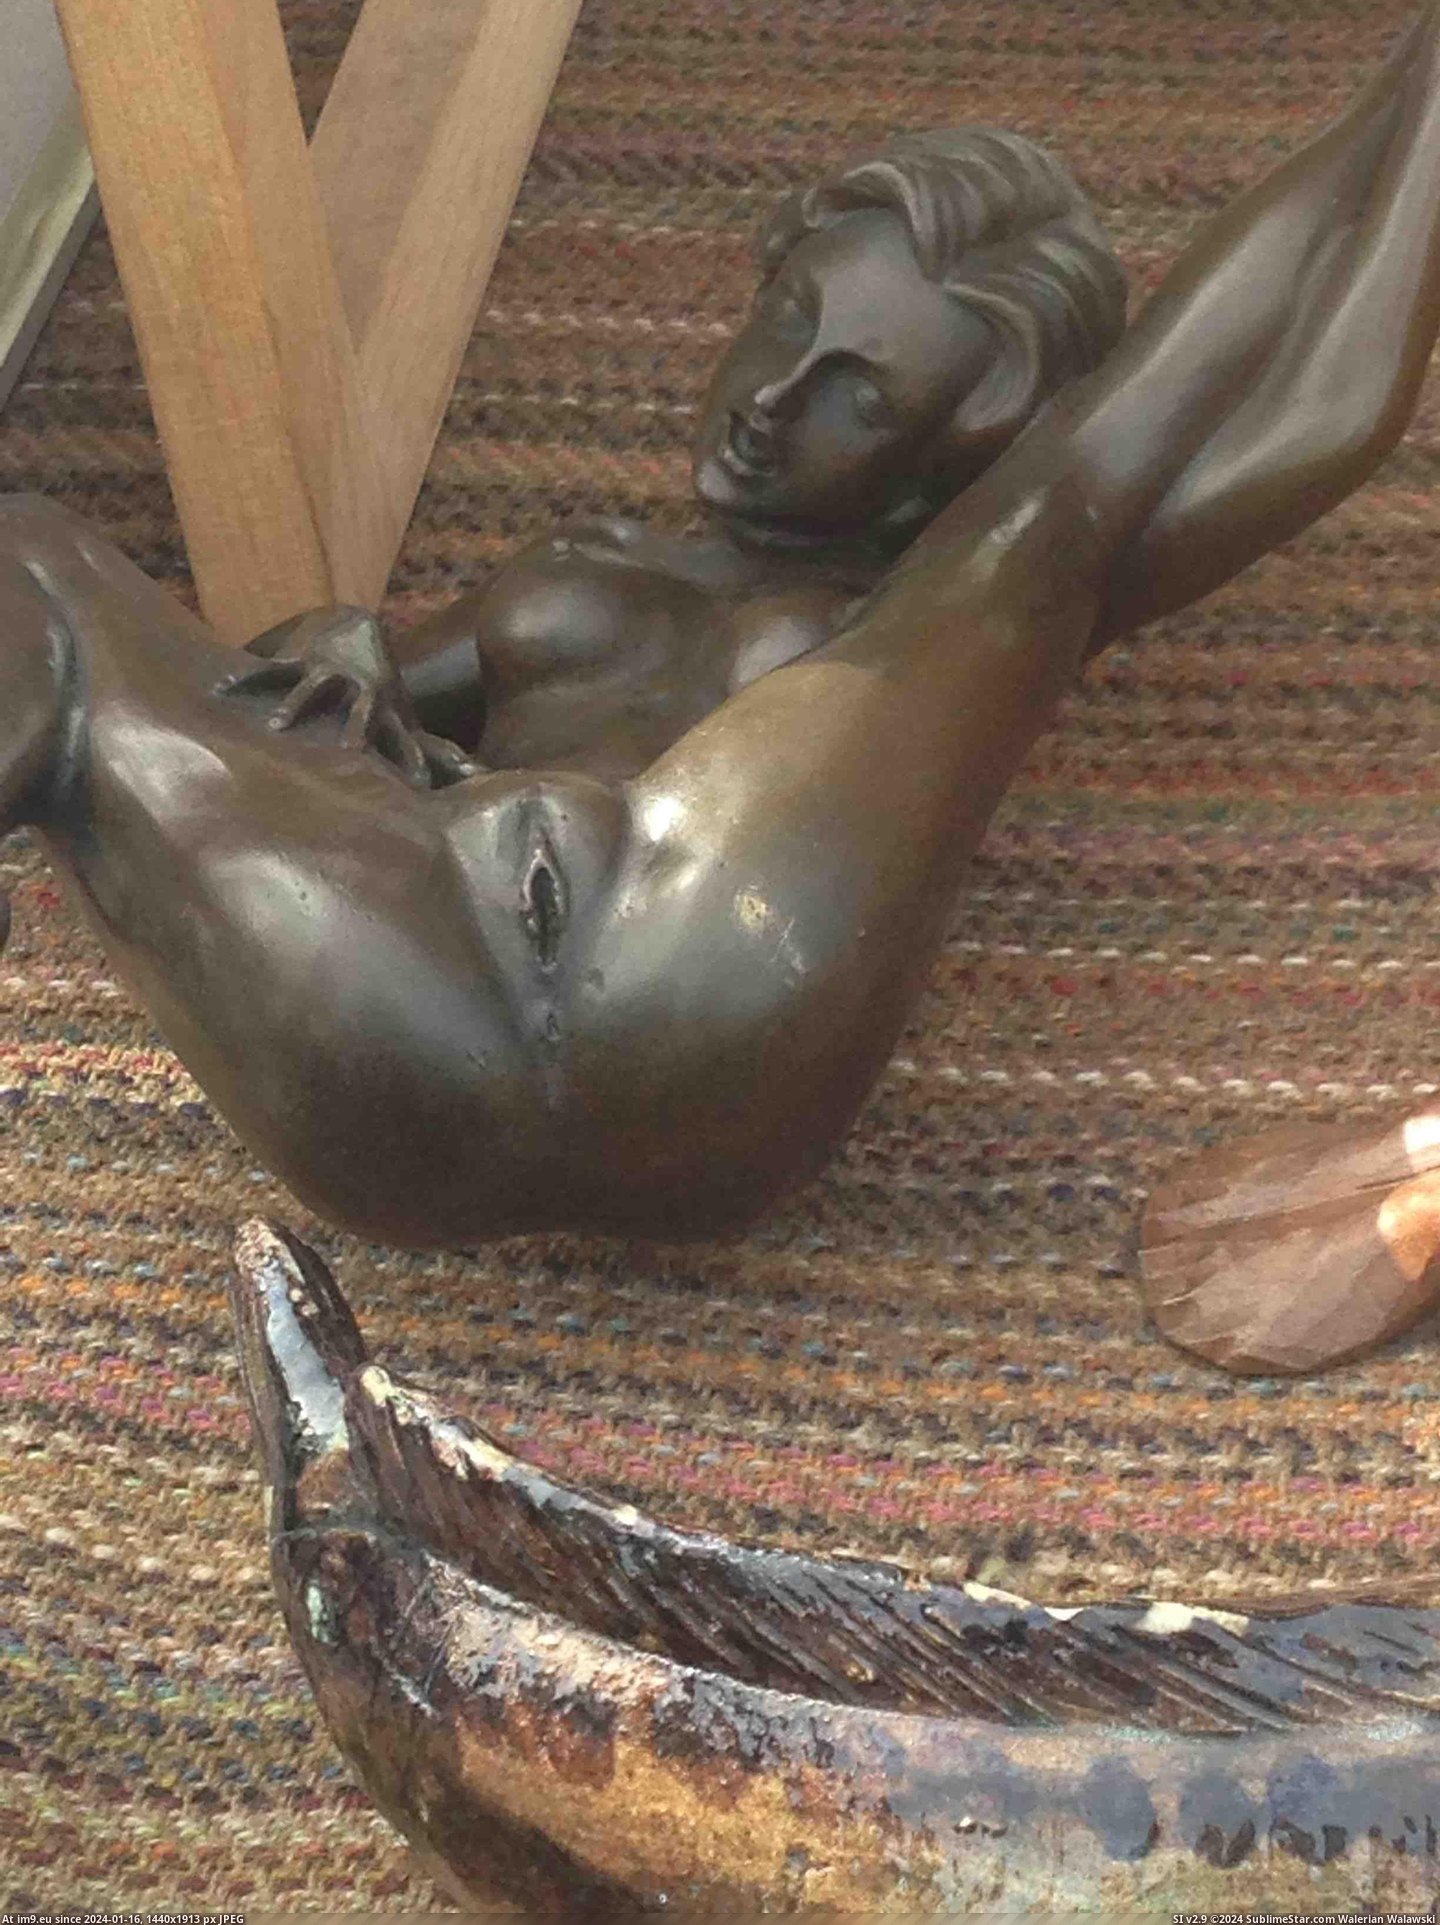 #Wtf #Wanted #Car #Bronze #Boot #Sale #Buy #Statue [Wtf] A bronze statue at a car boot sale.... My bf wanted to buy her... Pic. (Изображение из альбом My r/WTF favs))